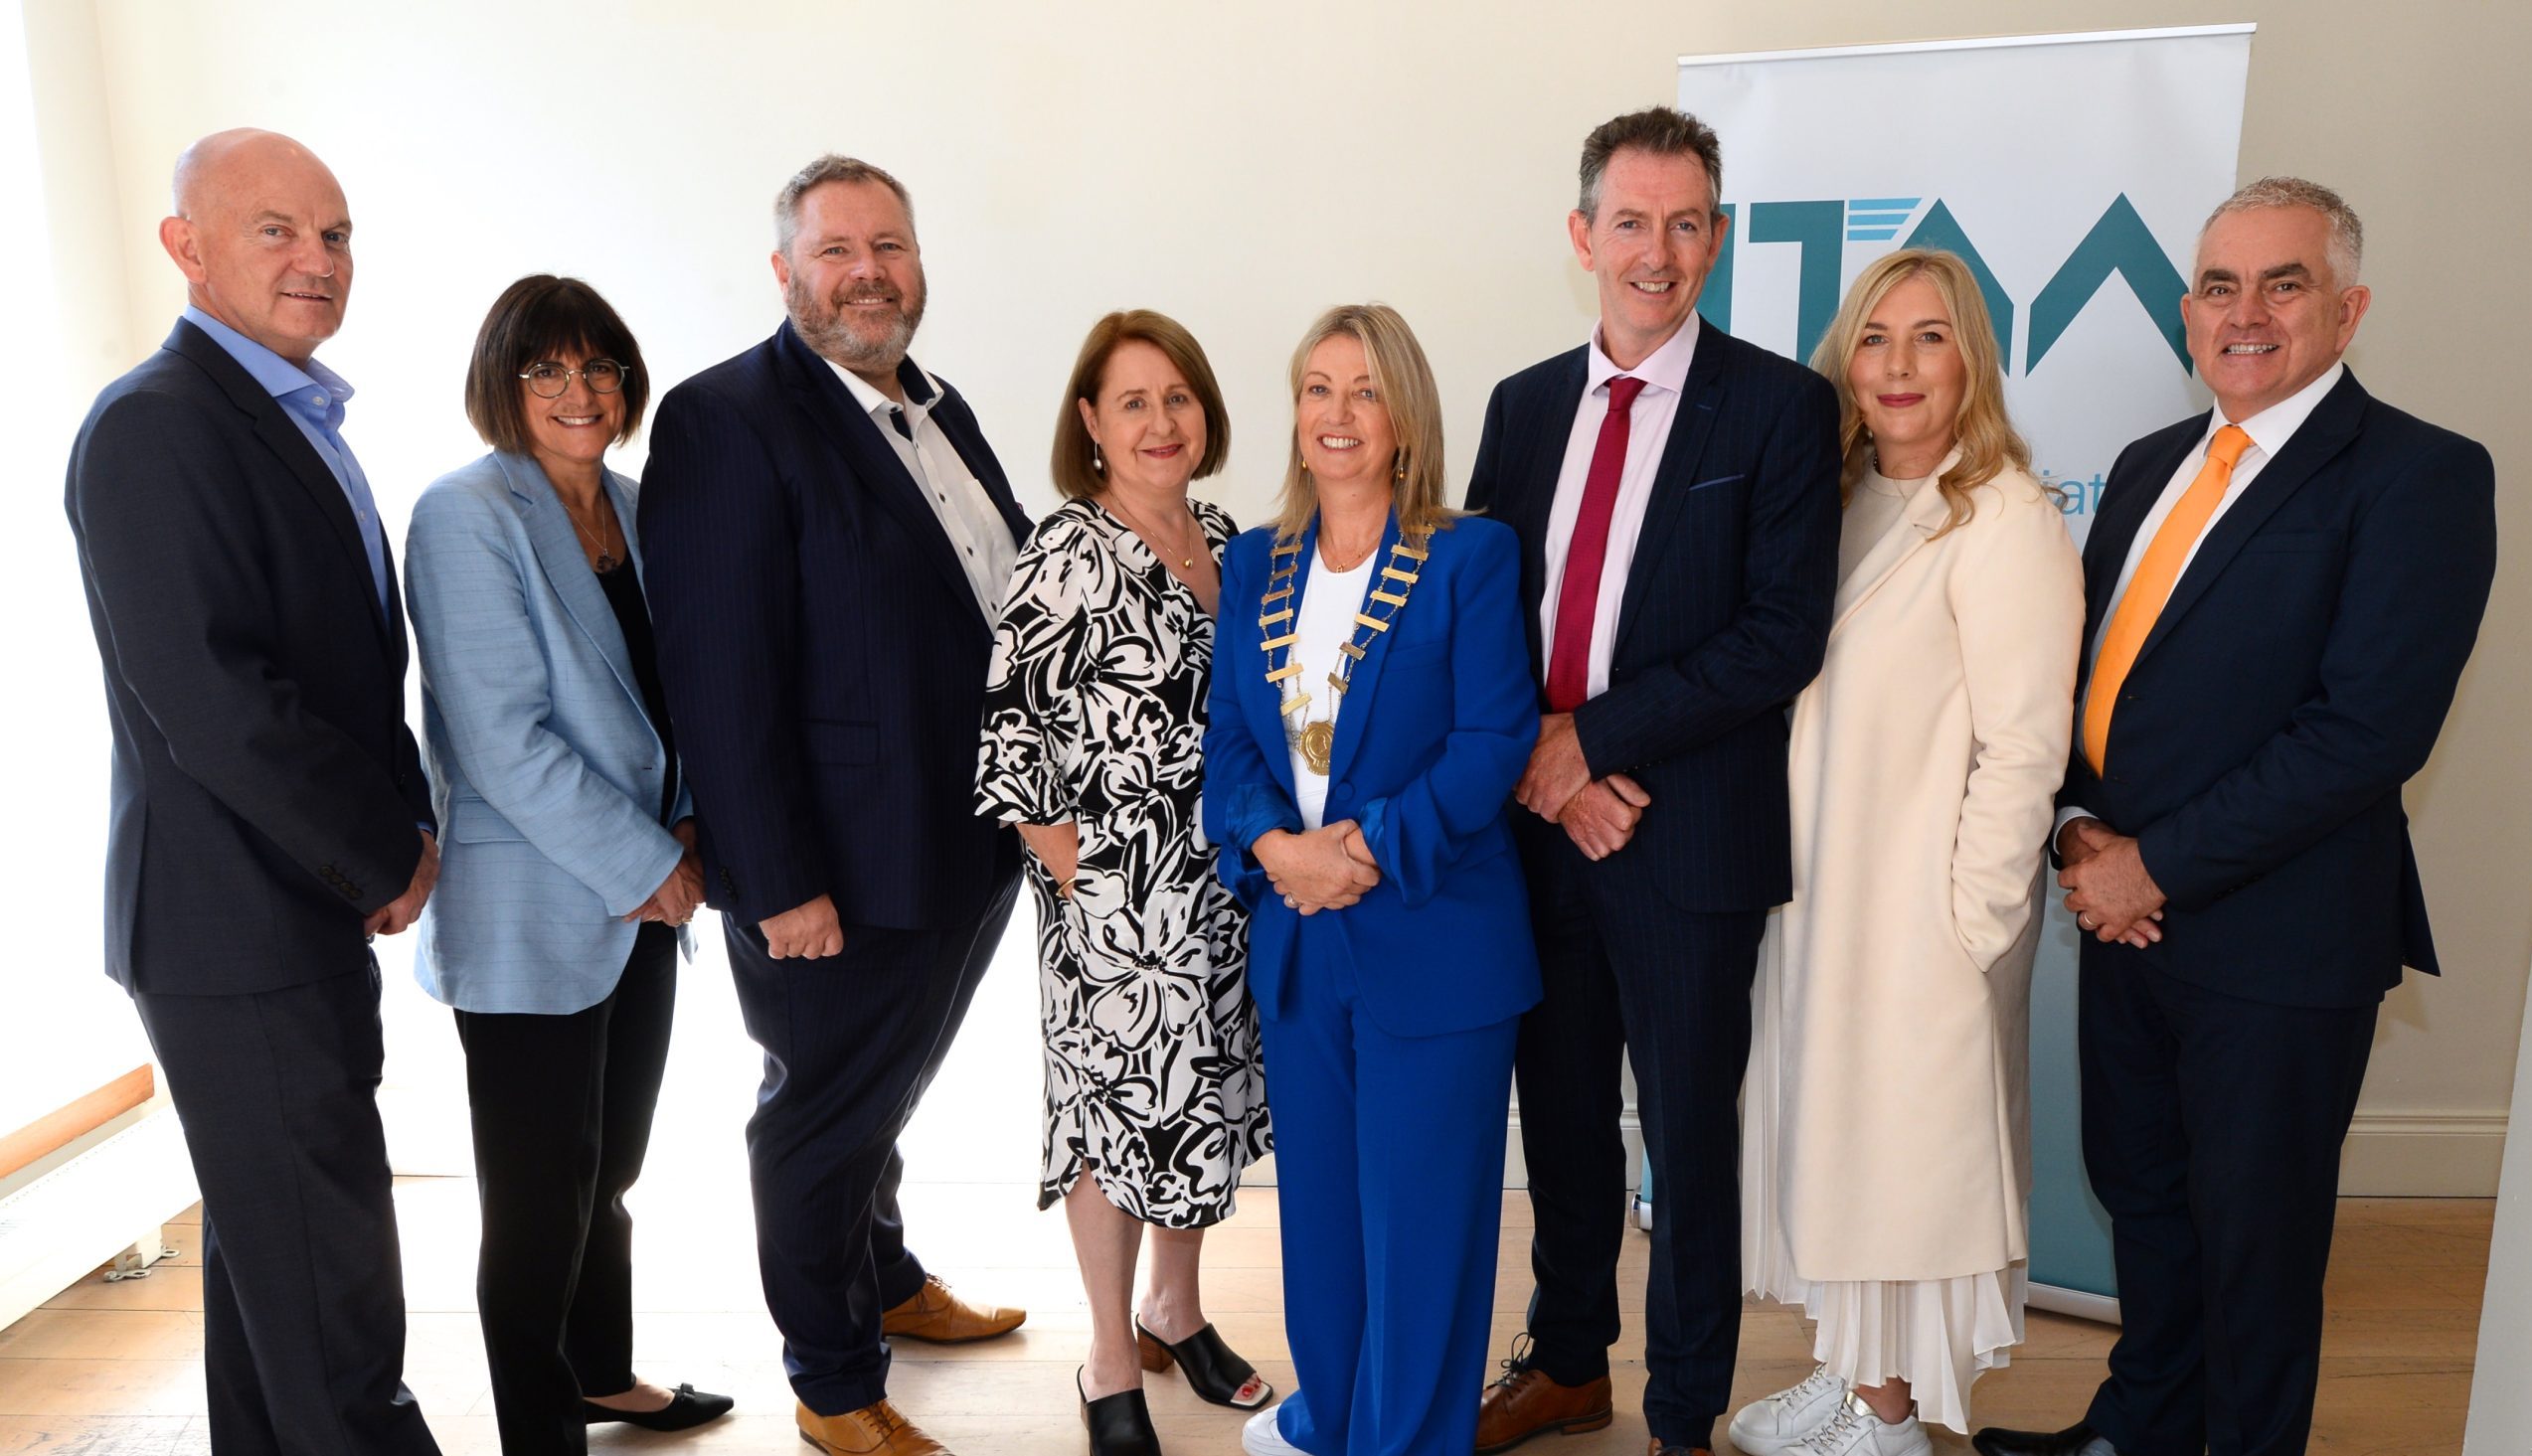 The Irish Travel Agents Association fosters excellence in leadership with new programme